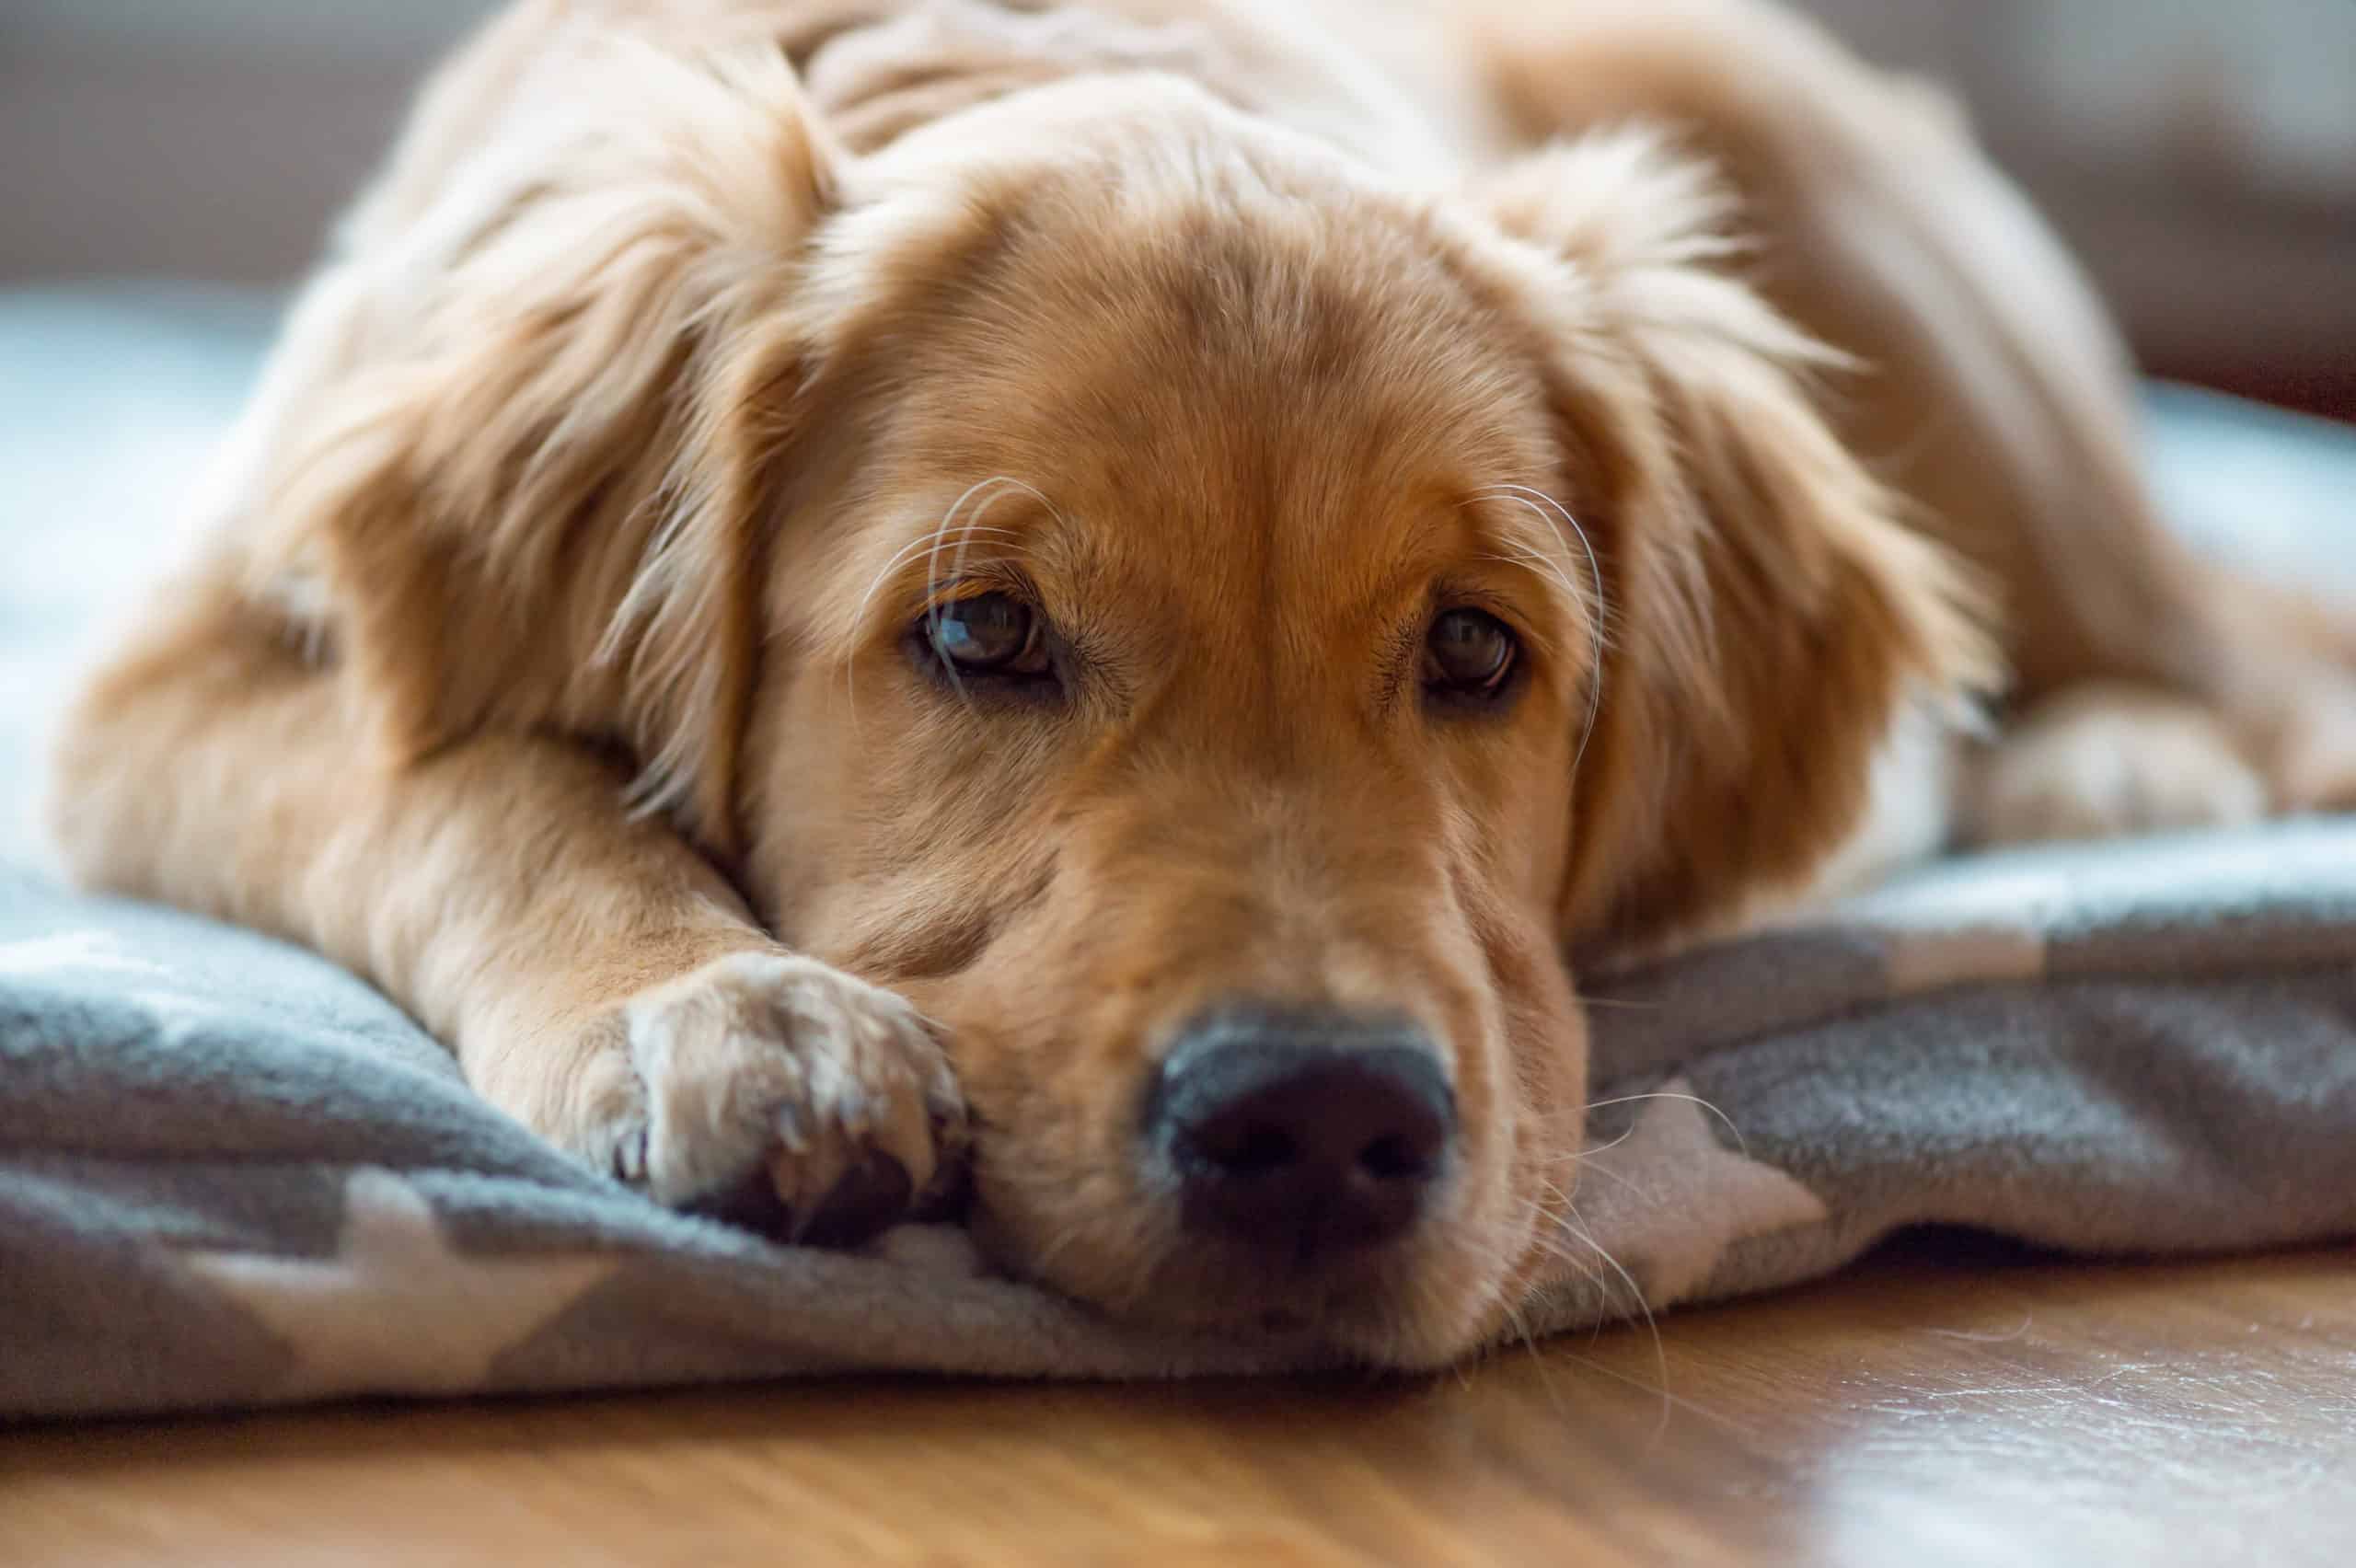 Do dogs get depressed after being neutered?